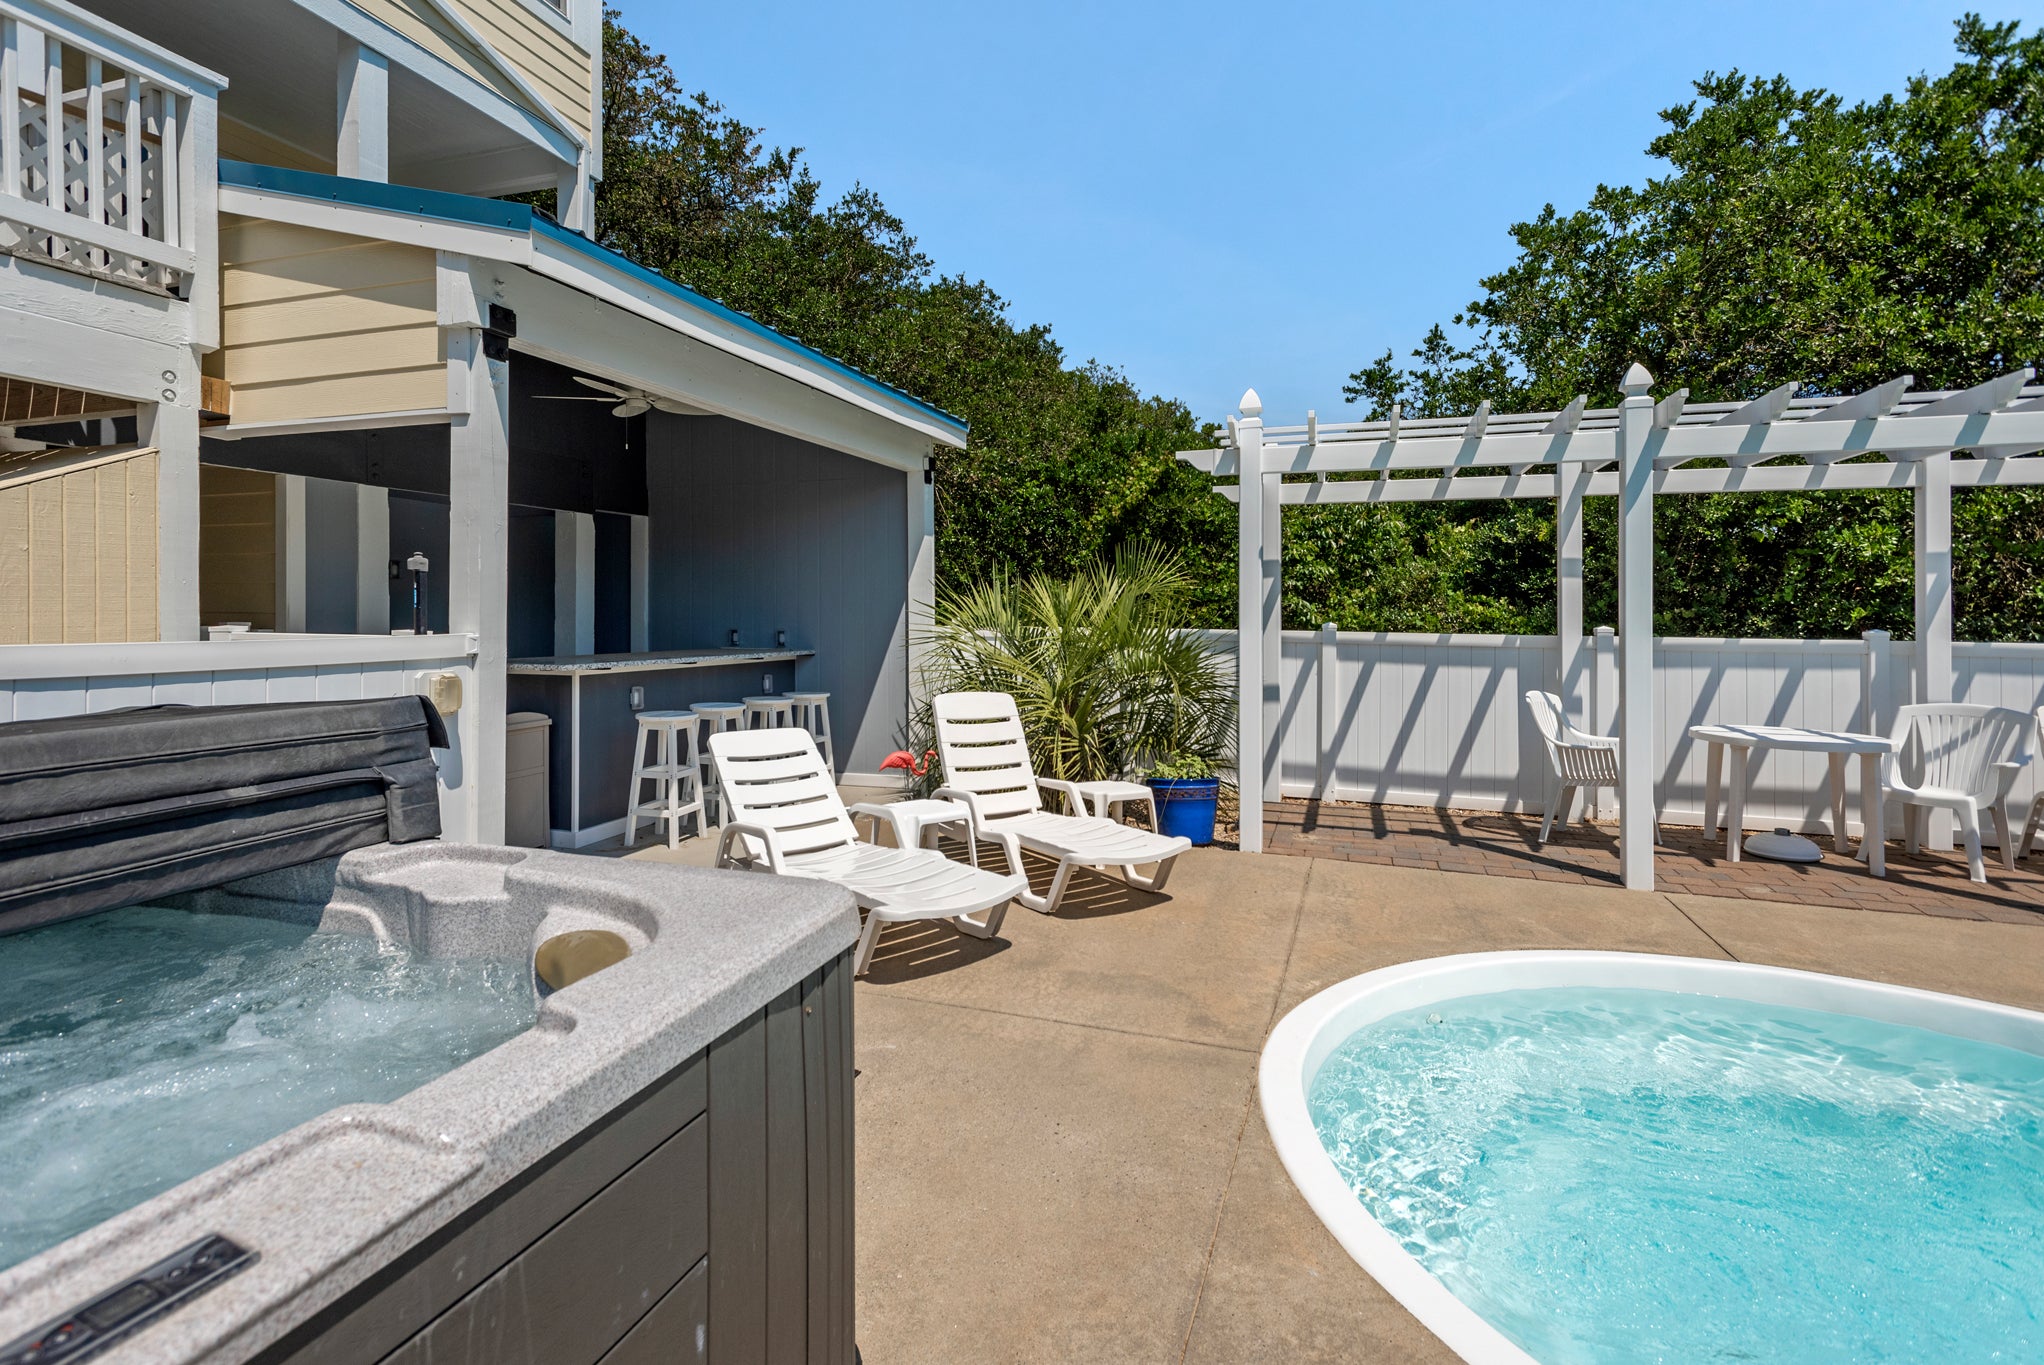 WH591: Shell's Shack l Pool Area w/ Hot Tub